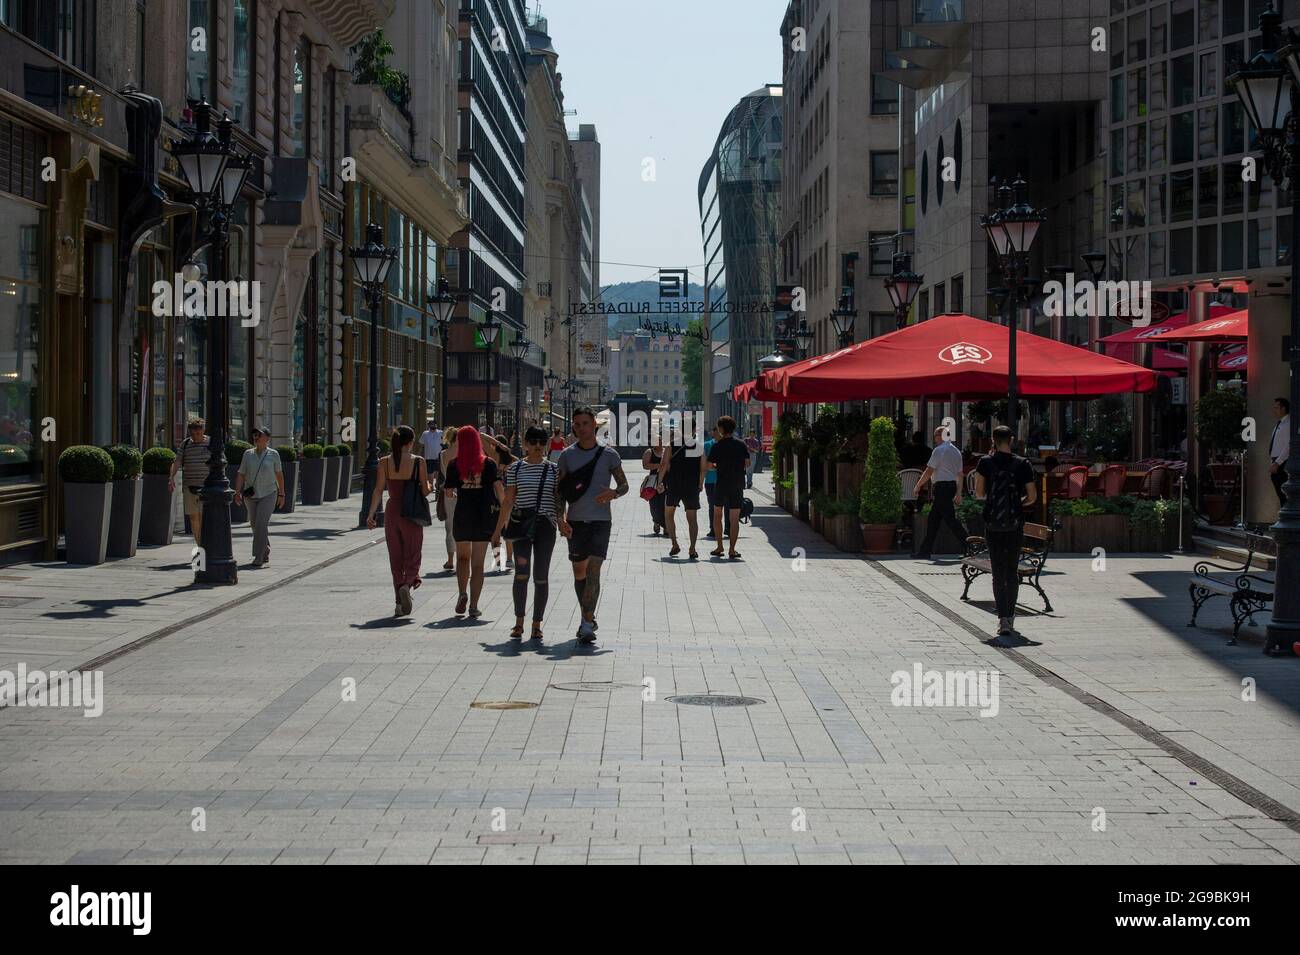 Budapest, Warsaw, Hungary. 25th July, 2021. People walk on Deak Ferenc street, also known as Fashion Street on July 25, 2021 in Budapest, Hungary. (Credit Image: © Aleksander Kalka/ZUMA Press Wire) Stock Photo